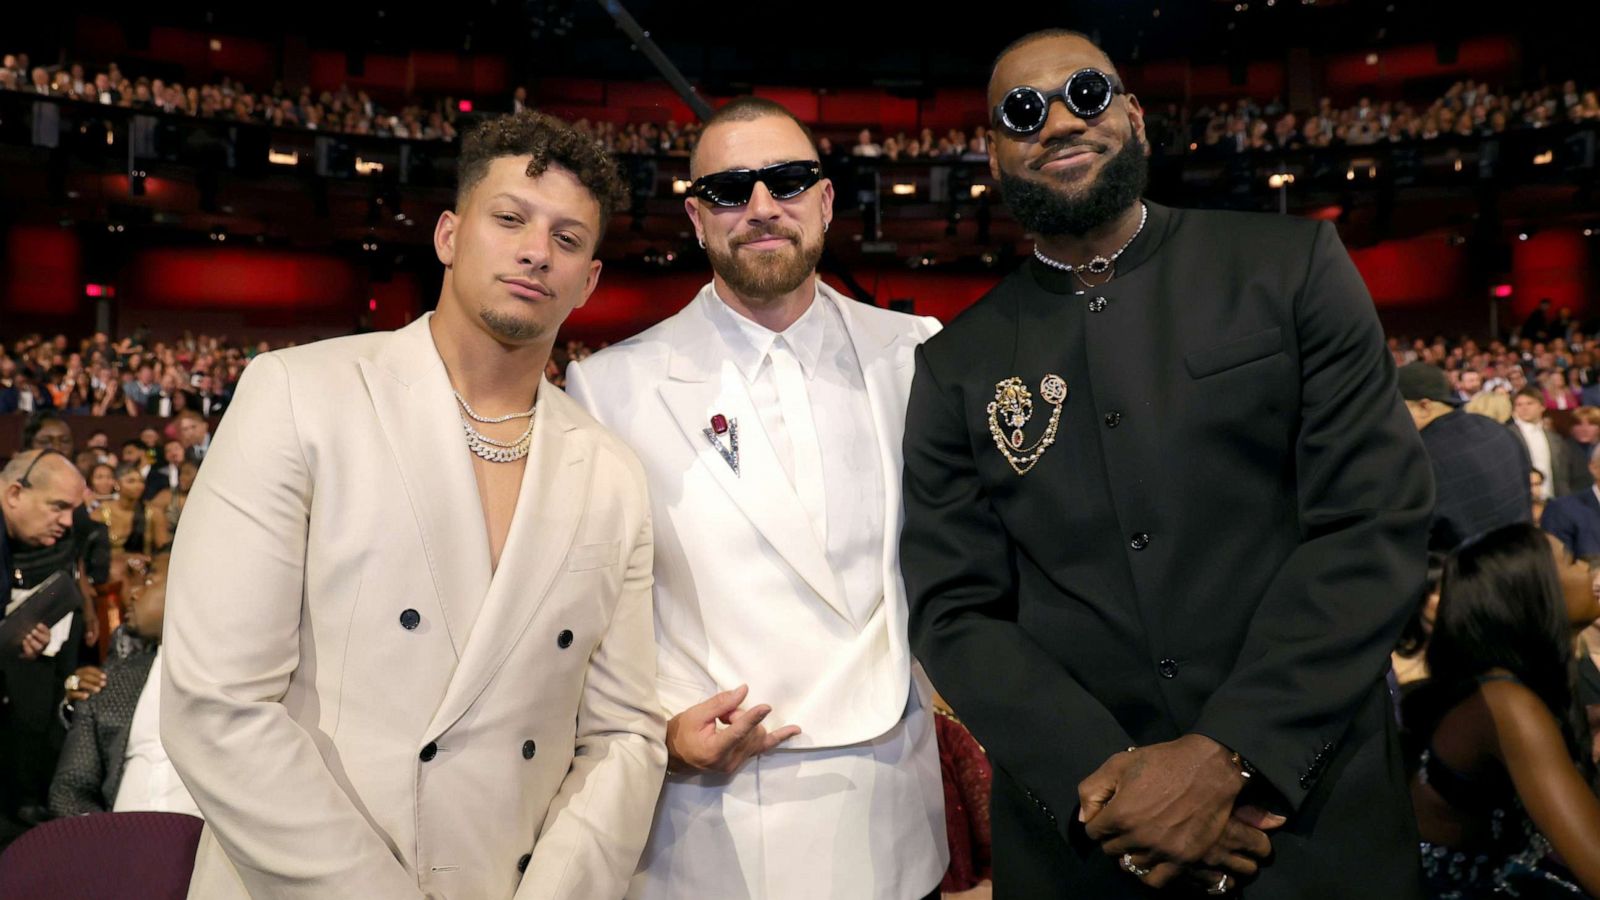 Patrick Mahomes Wins Best Male Athlete at ESPYS